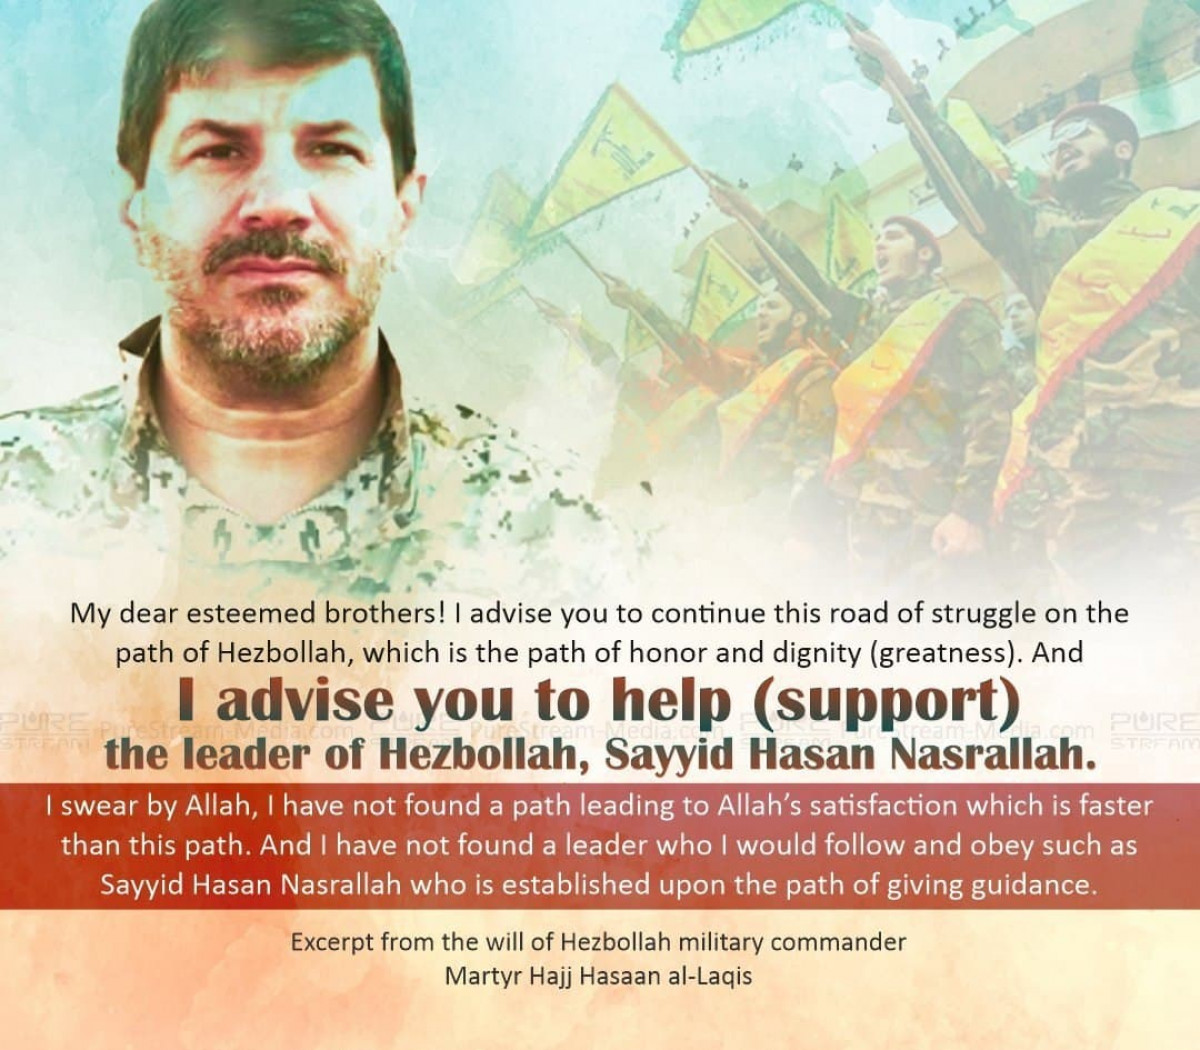 I advise you to help (support) the leader of Hezbollah